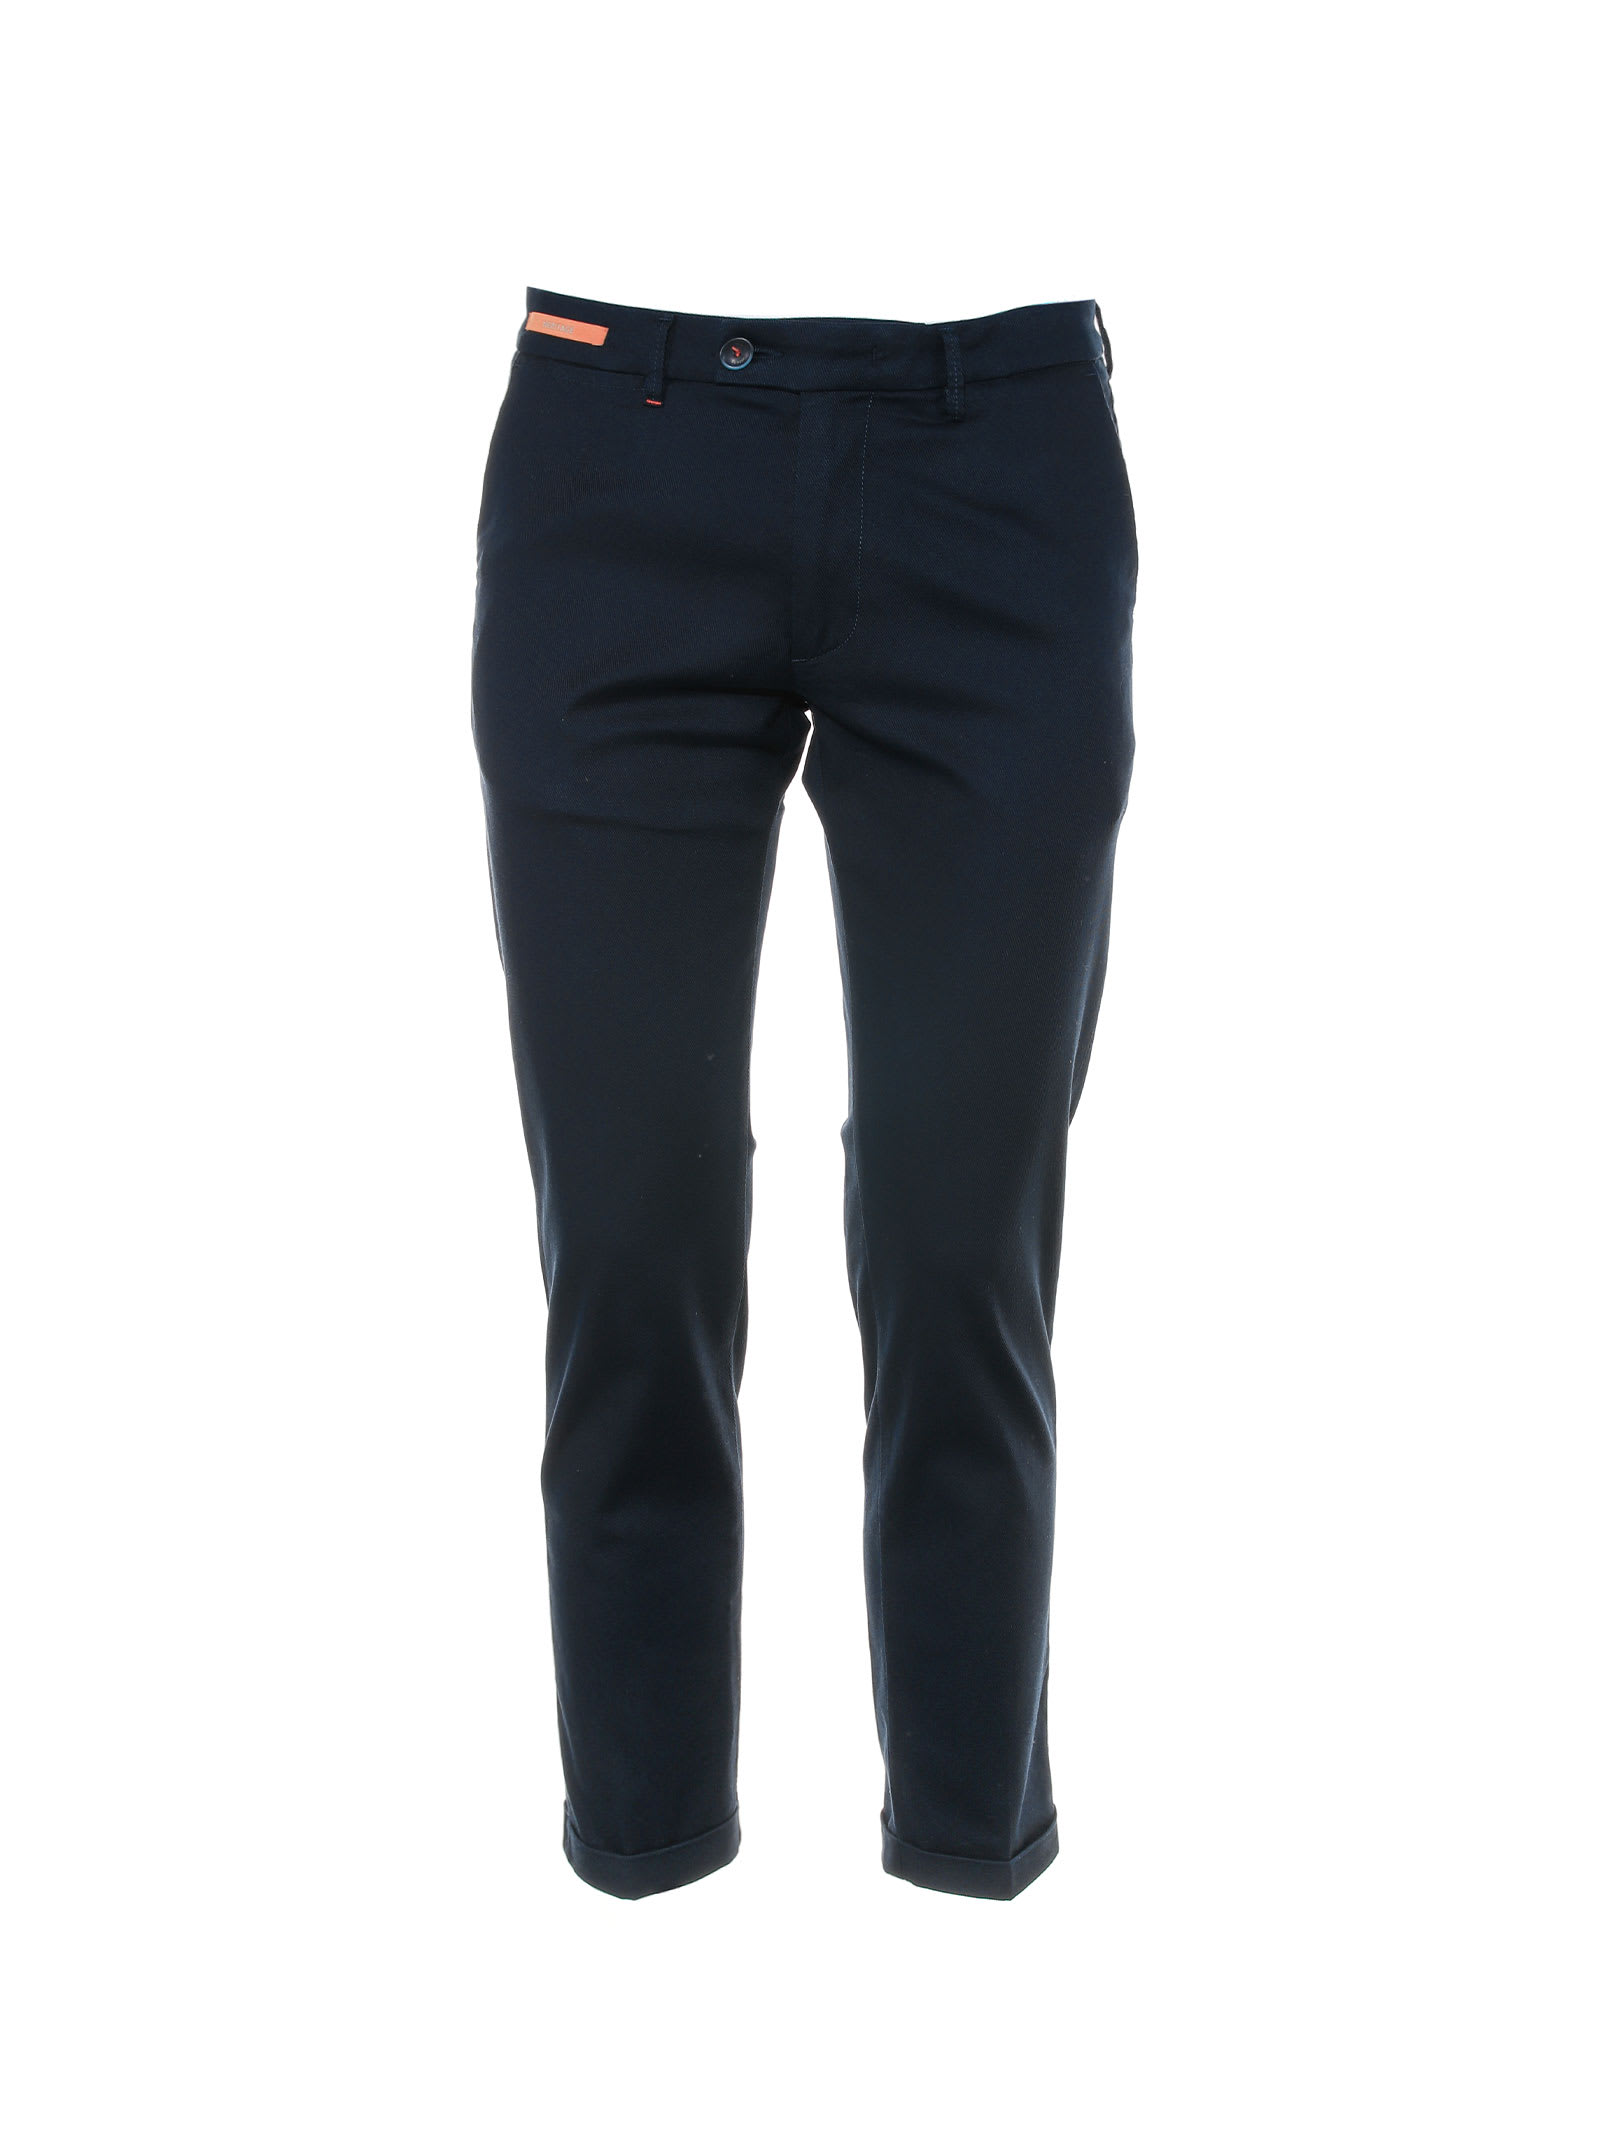 Re-HasH Trousers With Contrasting Detail